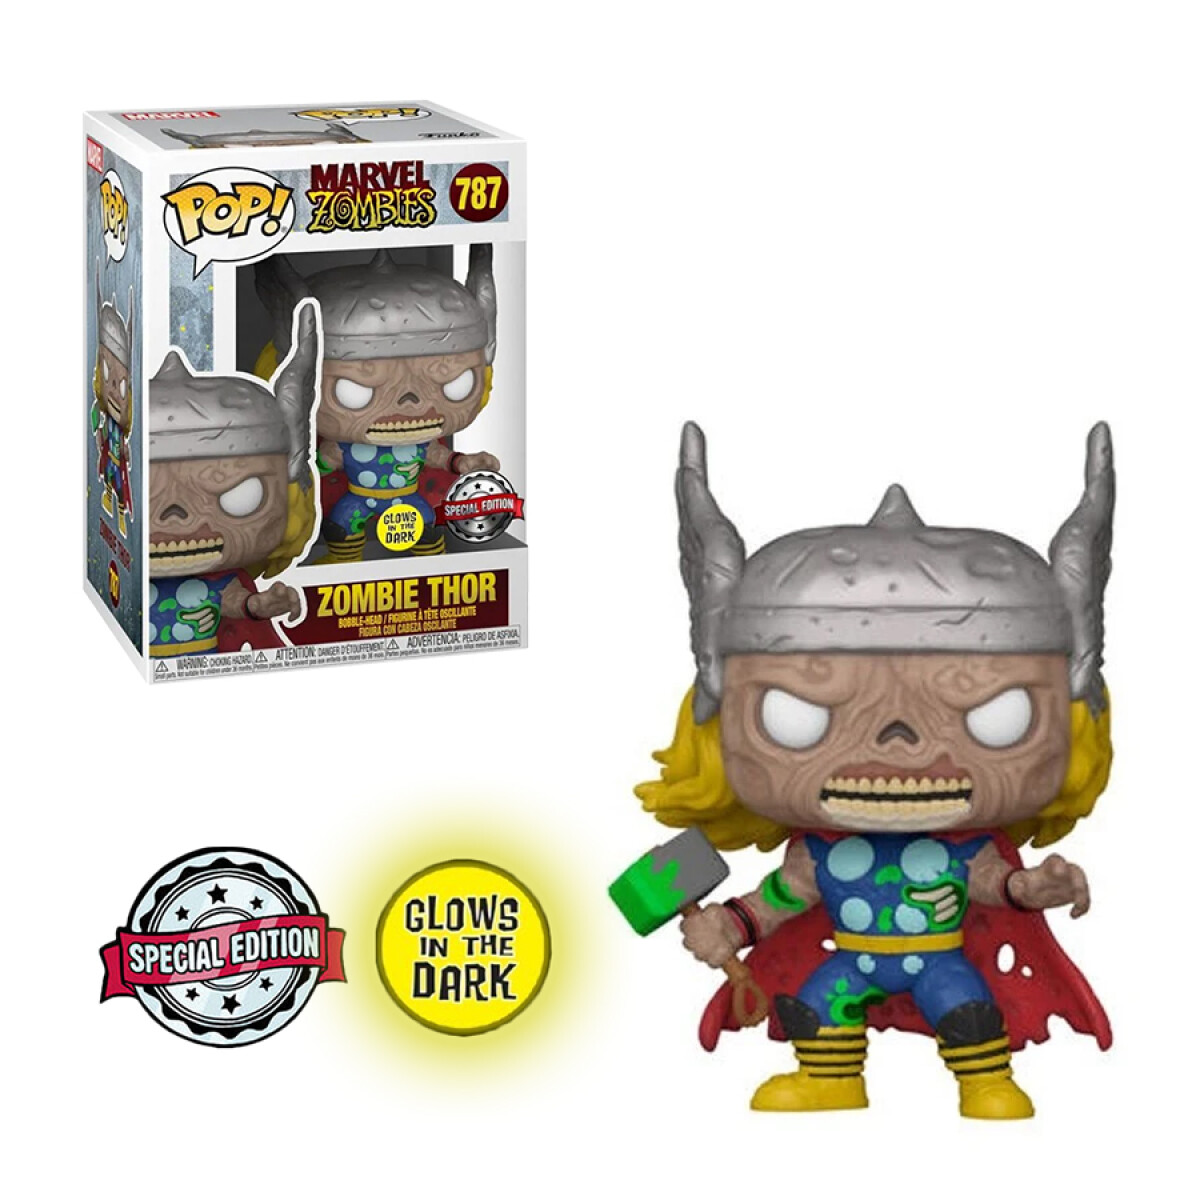 Zombie Thor · Marvel Zombies [Exclusivo - Glows in the Dark] - 787 